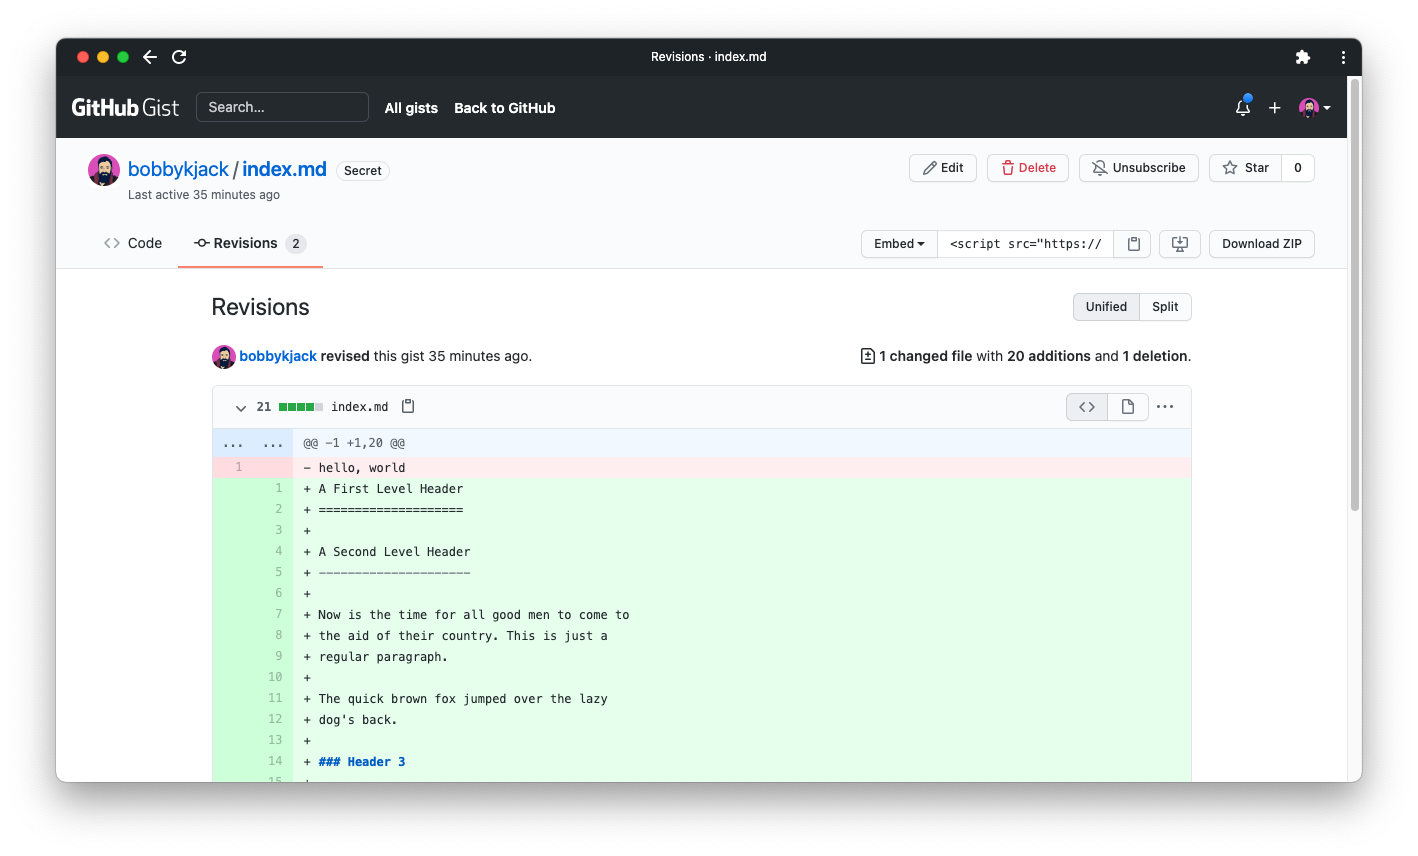 A screenshot of the GitHub Gist site showing revisions of a gist